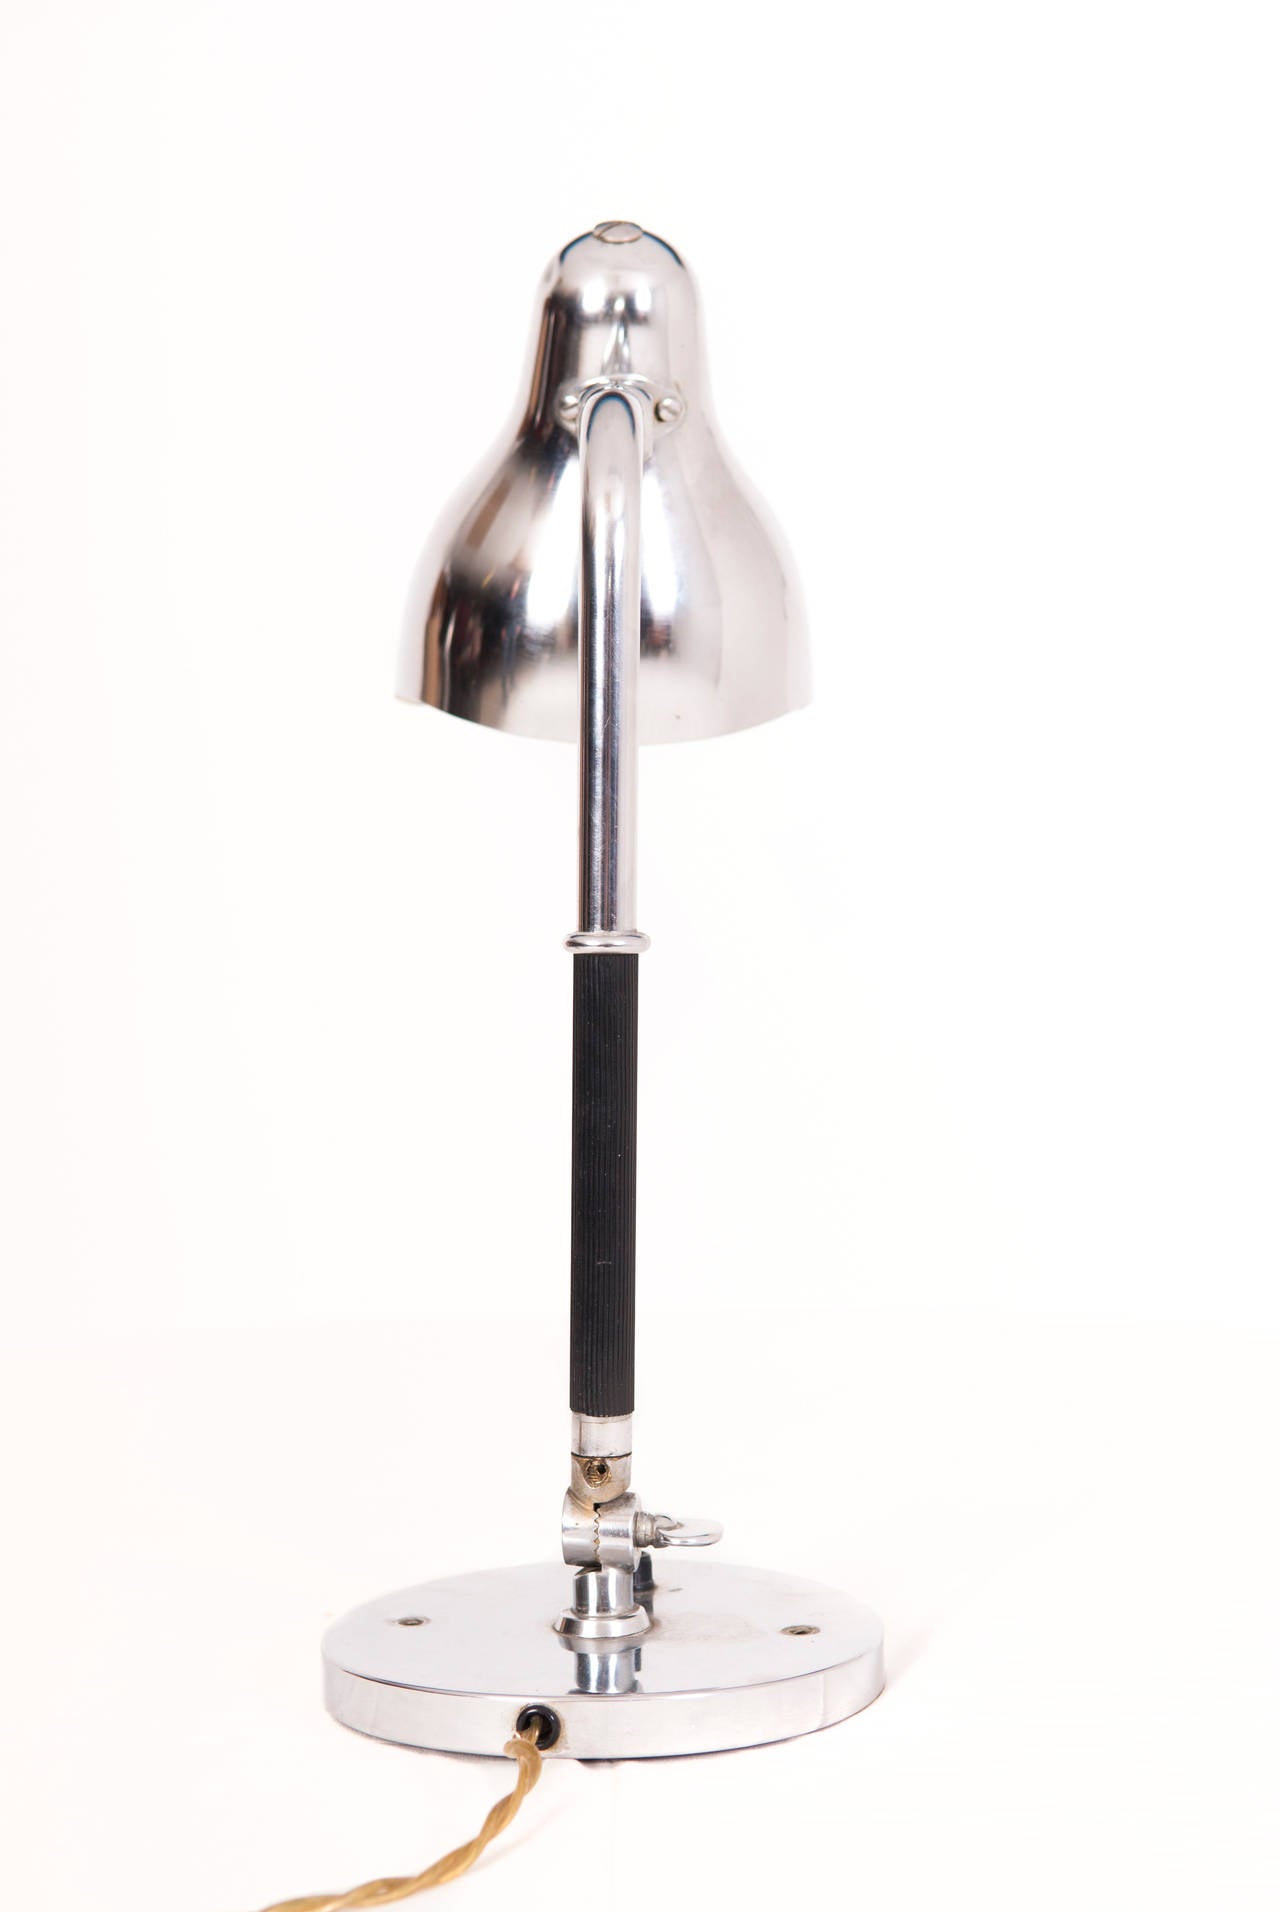 Vilhelm Lauritzen chromed metal table or wall lamp. 

Slightly curved conical shade. Stem covered with grooved black vinyl.

Designed: circa 1930.
Manufacture: Louis Poulsen.